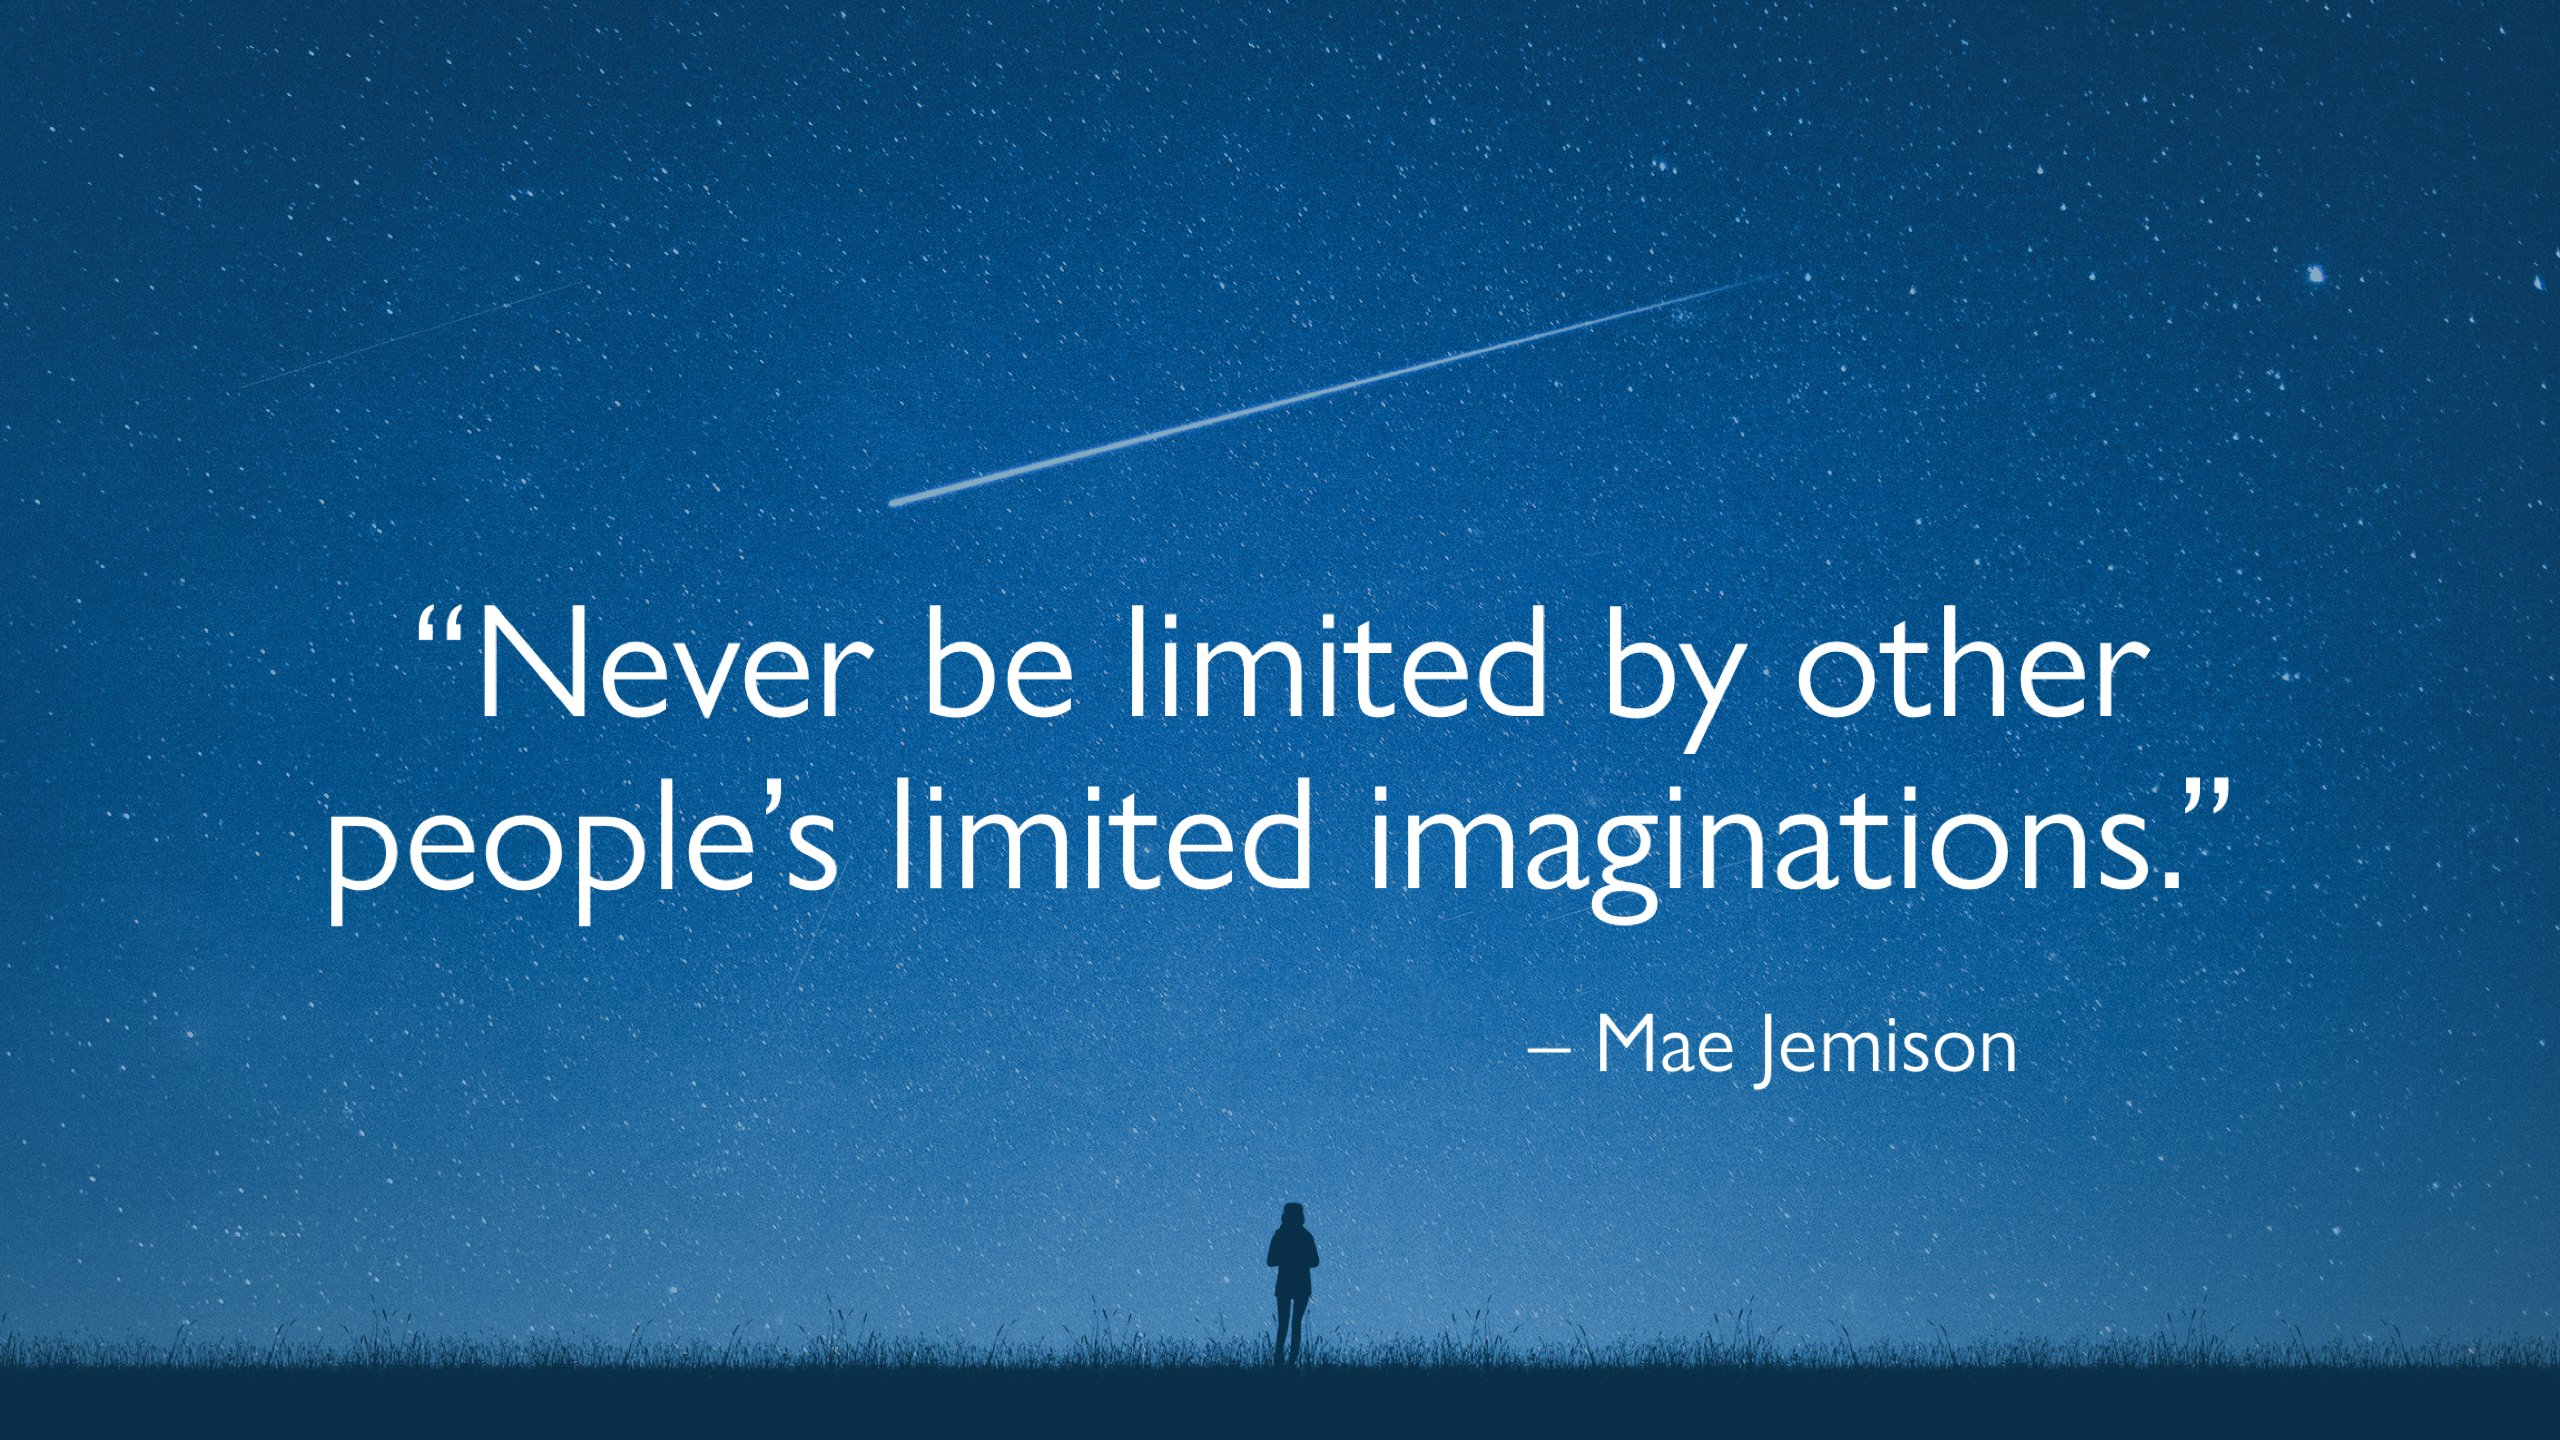 "Never be limited by other people's limited imaginations."  by Mae Jamison